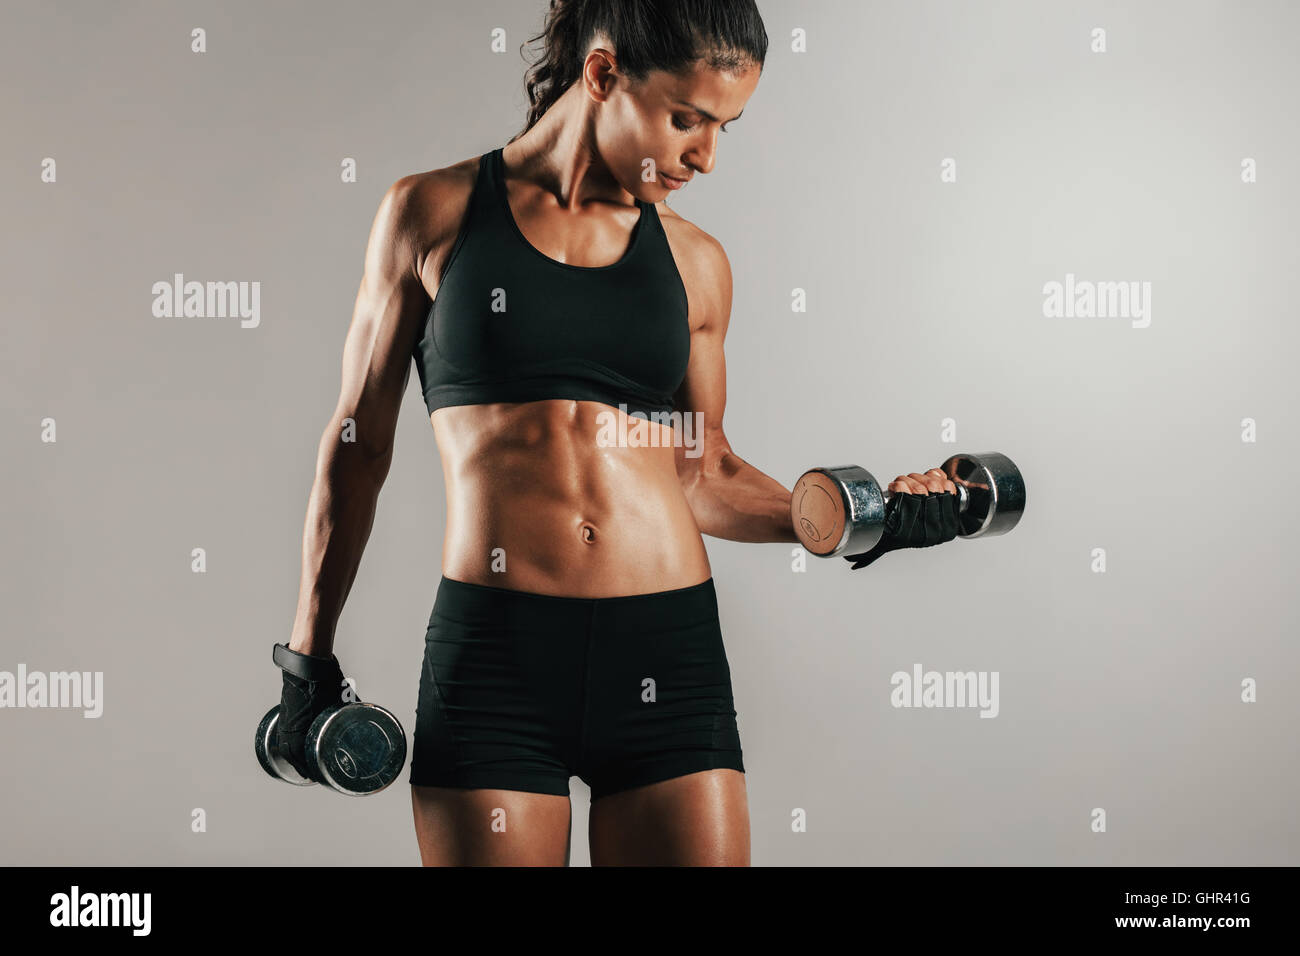 Single healthy athletic woman in black clothing with muscular body lifting chrome finish dumbbell weights over gray background w Stock Photo